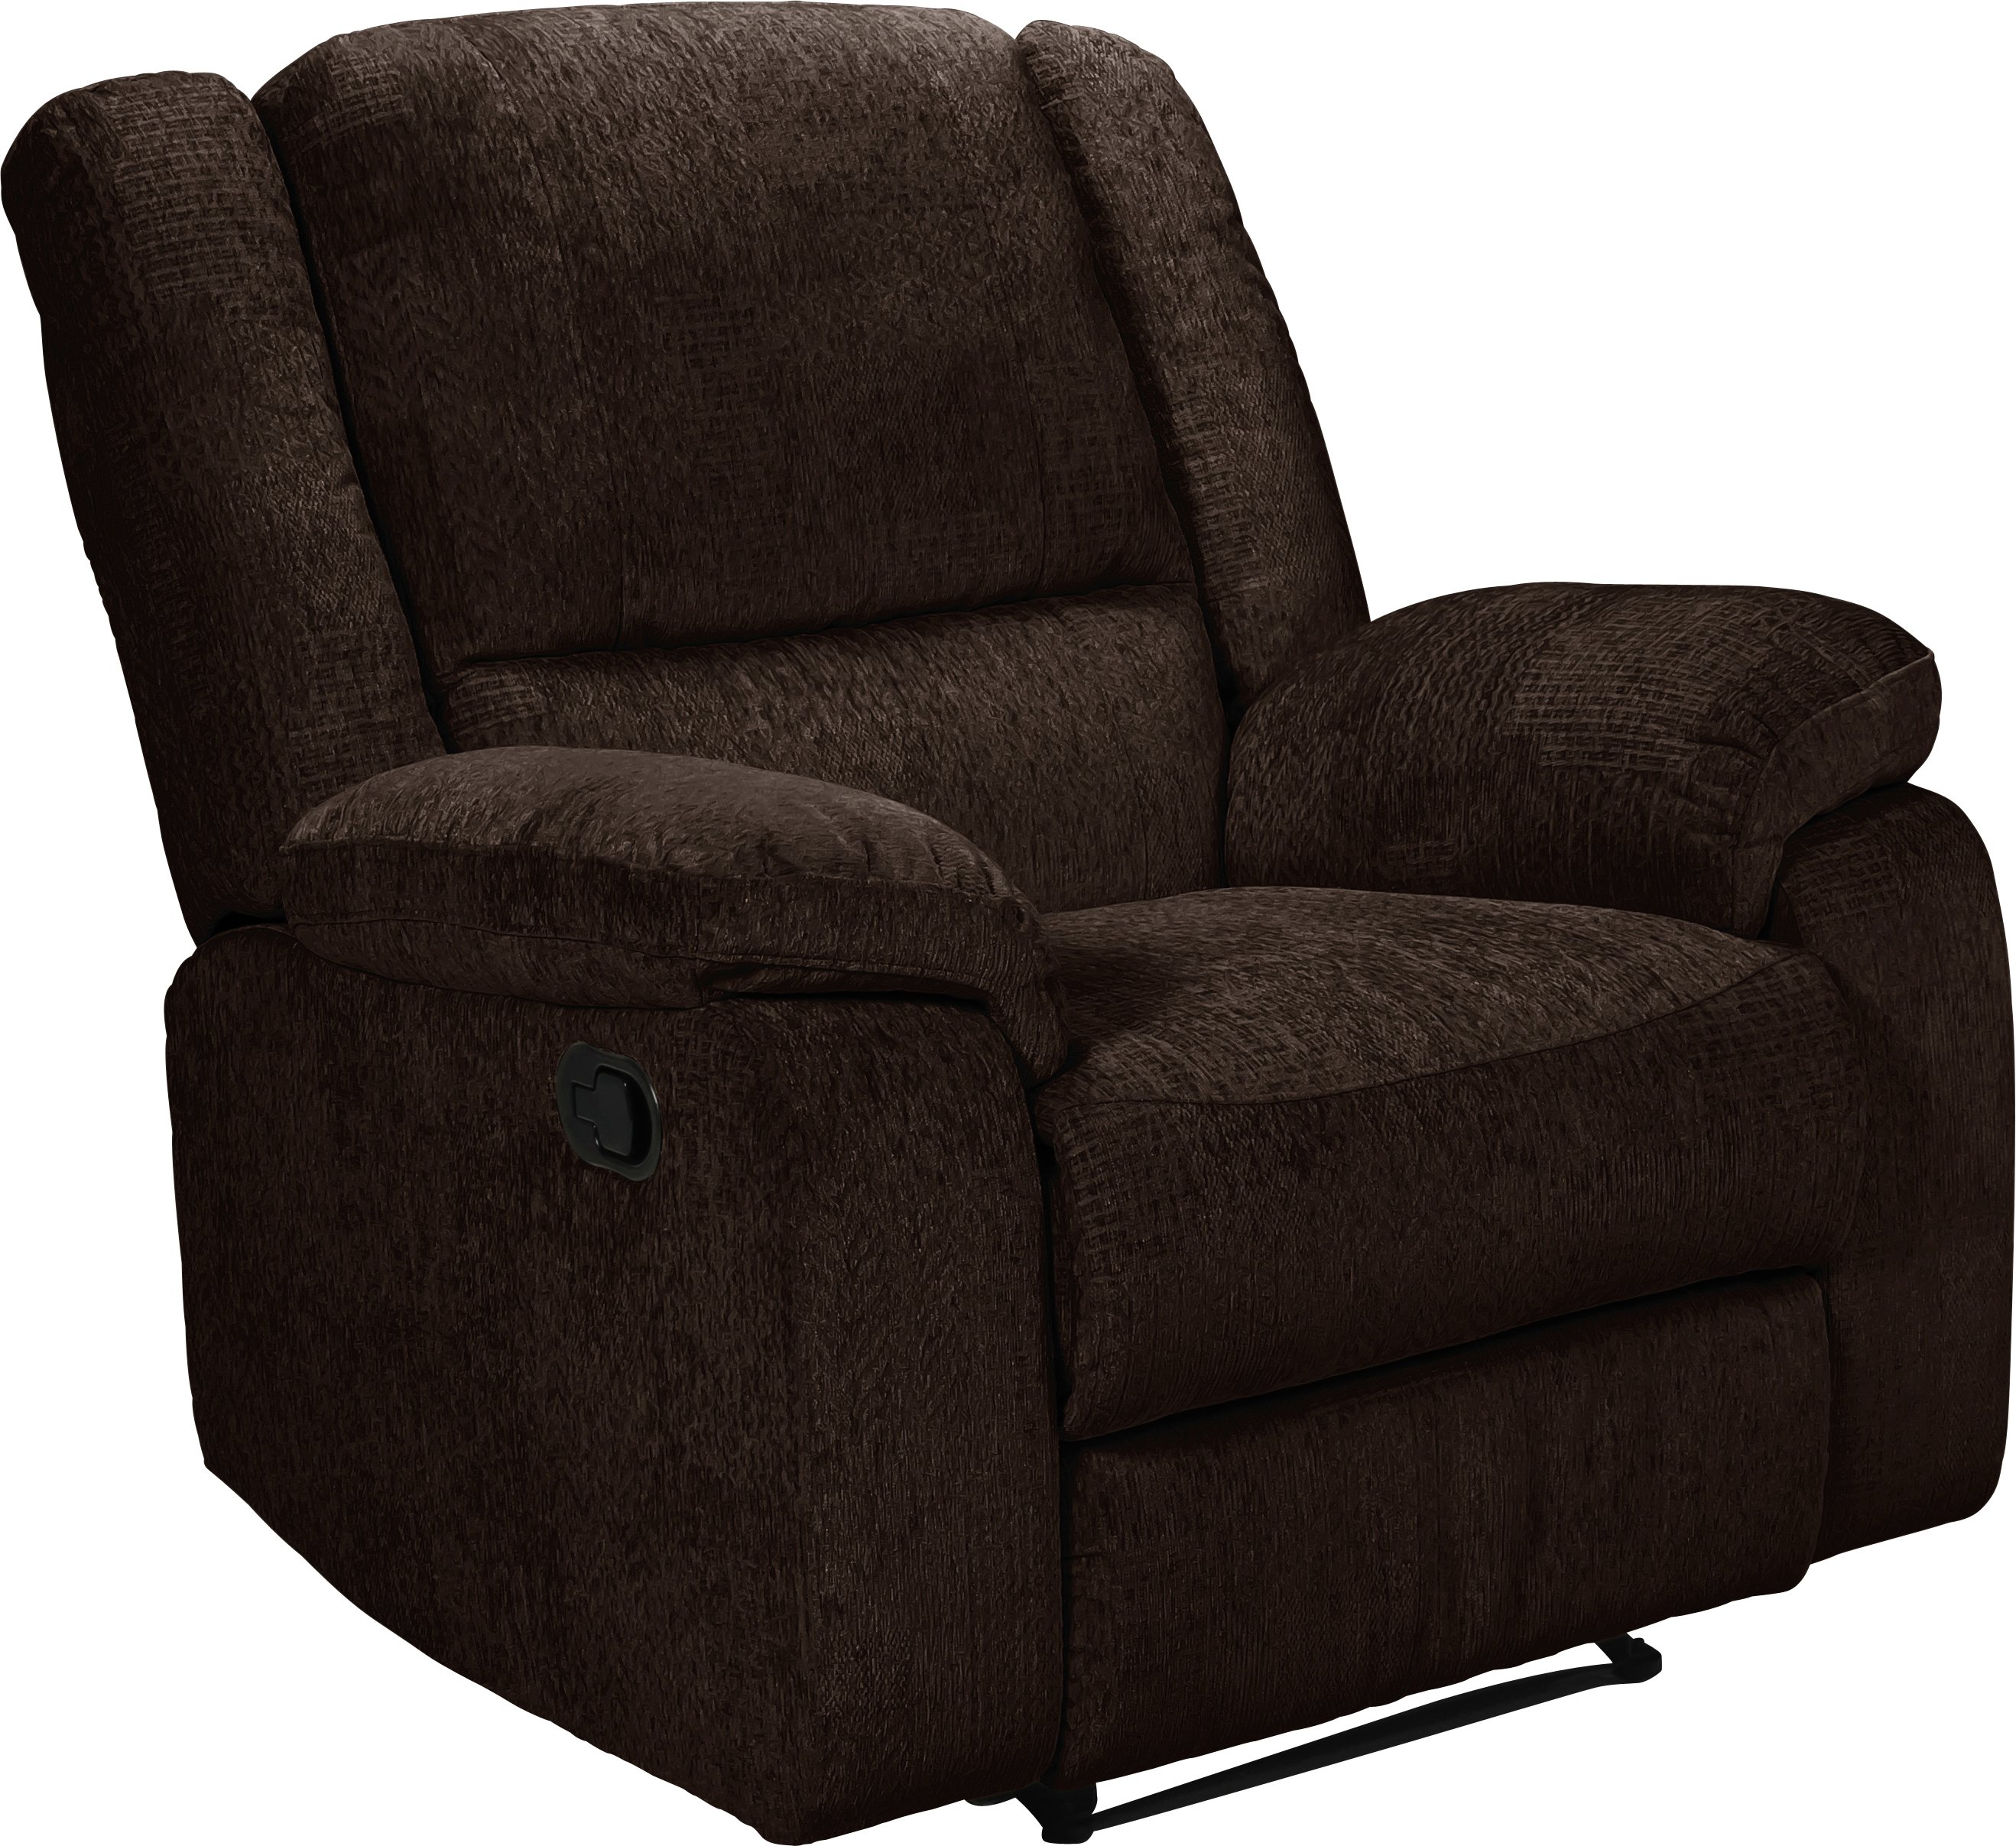 Collection Shelly Fabric Manual Recliner Chair - Dark Brown